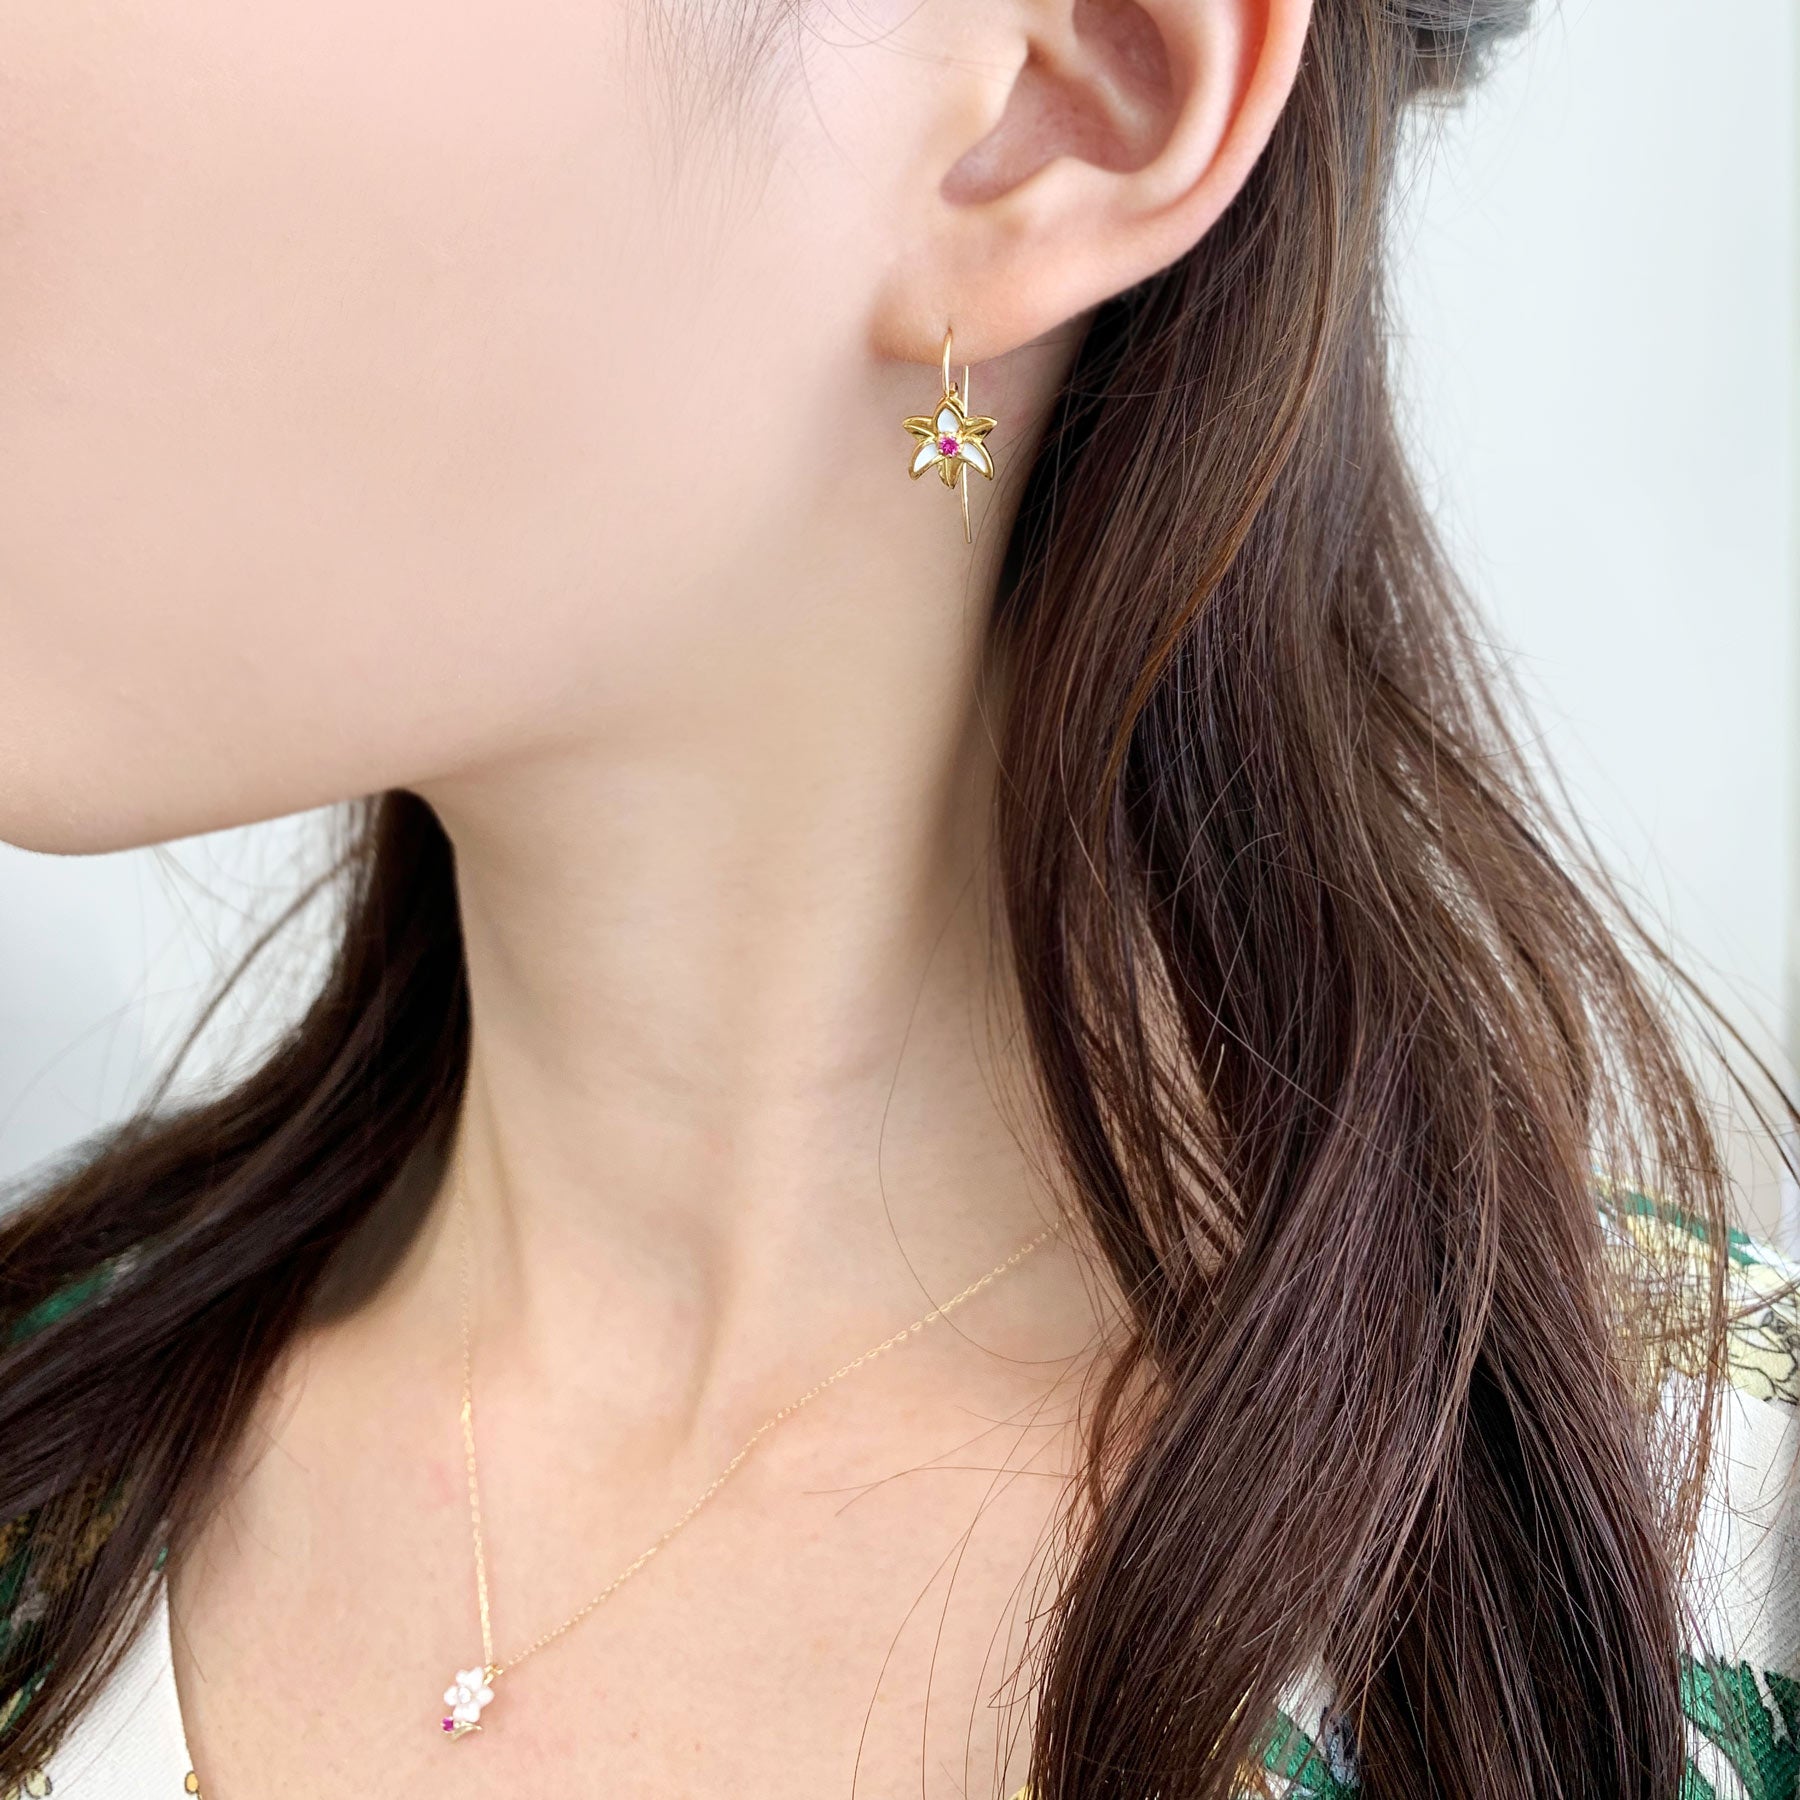 [Birth Flower Jewelry] July - Lily Earrings (925 Sterling Silver / Gold Filled) - Model Image